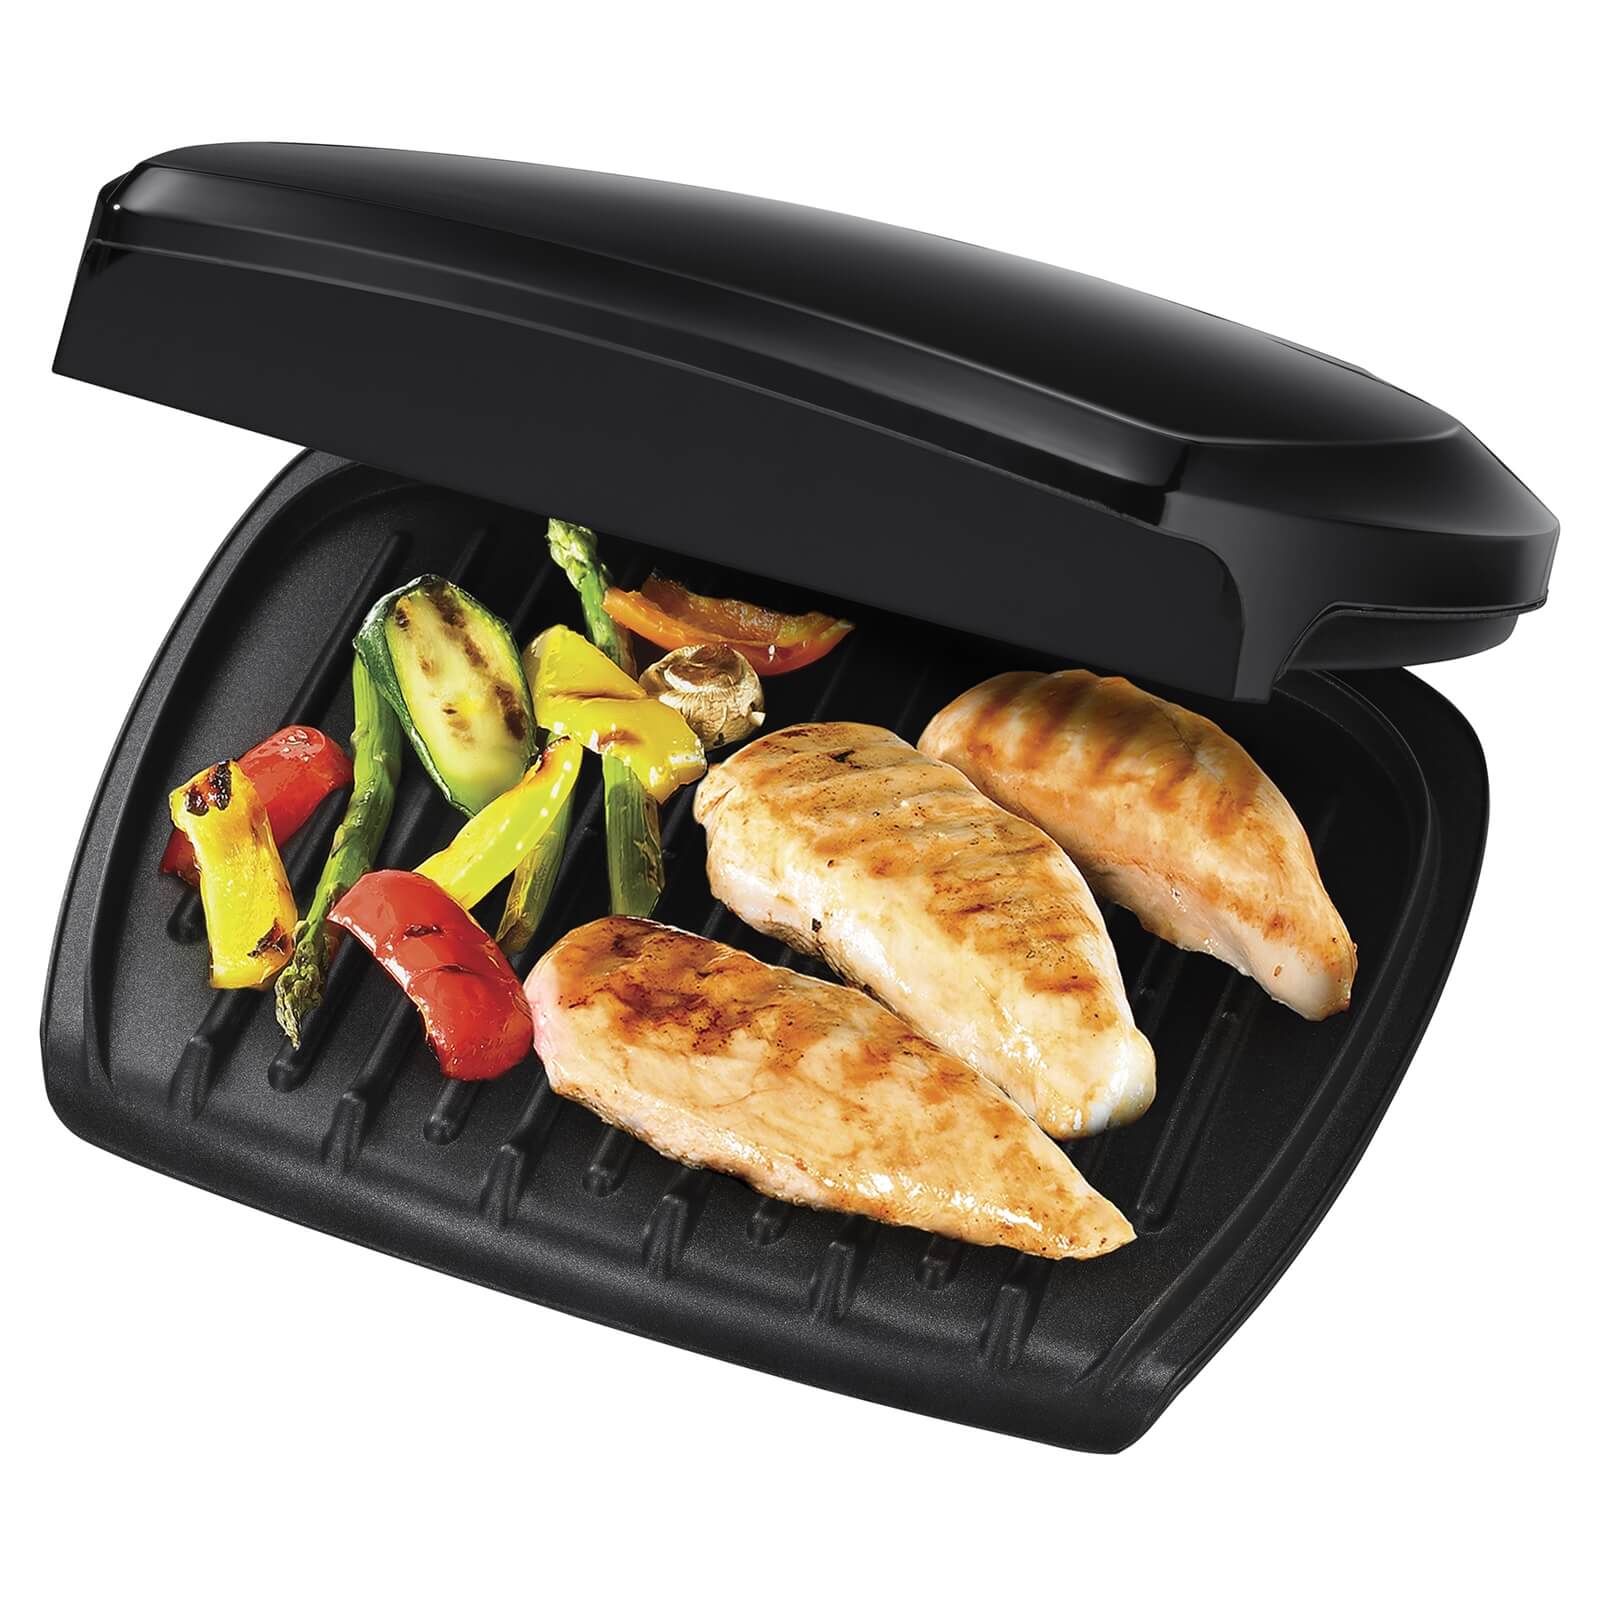 George Foreman Family Grill - Black